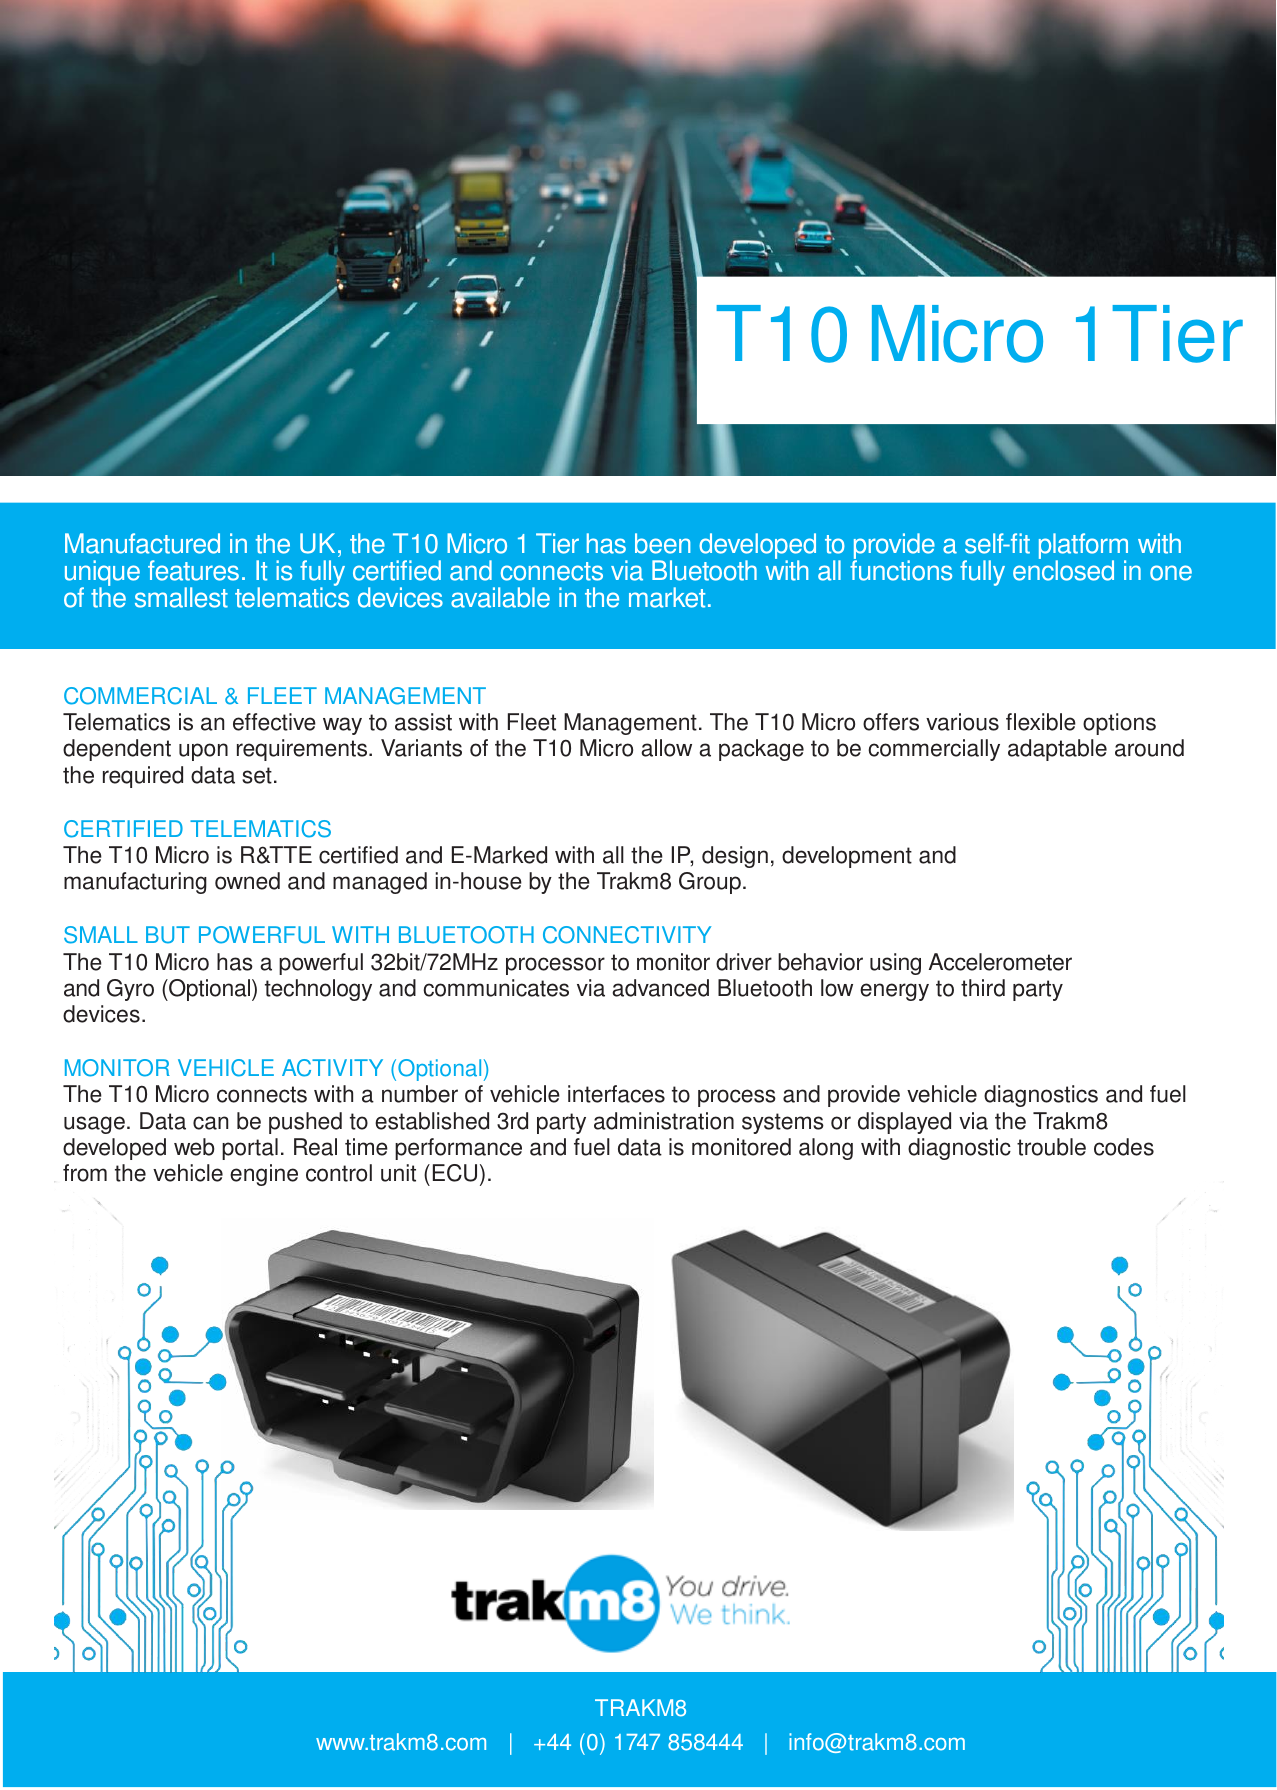 T10 Micro 1Tier    Manufactured in the UK, the T10 Micro 1 Tier has been developed to provide a self-fit platform with unique features. It is fully certified and connects via Bluetooth with all functions fully enclosed in one of the smallest telematics devices available in the market.    COMMERCIAL &amp; FLEET MANAGEMENT Telematics is an effective way to assist with Fleet Management. The T10 Micro offers various flexible options dependent upon requirements. Variants of the T10 Micro allow a package to be commercially adaptable around the required data set.  CERTIFIED TELEMATICS The T10 Micro is R&amp;TTE certified and E-Marked with all the IP, design, development and manufacturing owned and managed in-house by the Trakm8 Group.  SMALL BUT POWERFUL WITH BLUETOOTH CONNECTIVITY The T10 Micro has a powerful 32bit/72MHz processor to monitor driver behavior using Accelerometer and Gyro (Optional) technology and communicates via advanced Bluetooth low energy to third party devices.  MONITOR VEHICLE ACTIVITY (Optional) The T10 Micro connects with a number of vehicle interfaces to process and provide vehicle diagnostics and fuel usage. Data can be pushed to established 3rd party administration systems or displayed via the Trakm8 developed web portal. Real time performance and fuel data is monitored along with diagnostic trouble codes from the vehicle engine control unit (ECU).                         TRAKM8 www.trakm8.com   |   +44 (0) 1747 858444   |   info@trakm8.com 